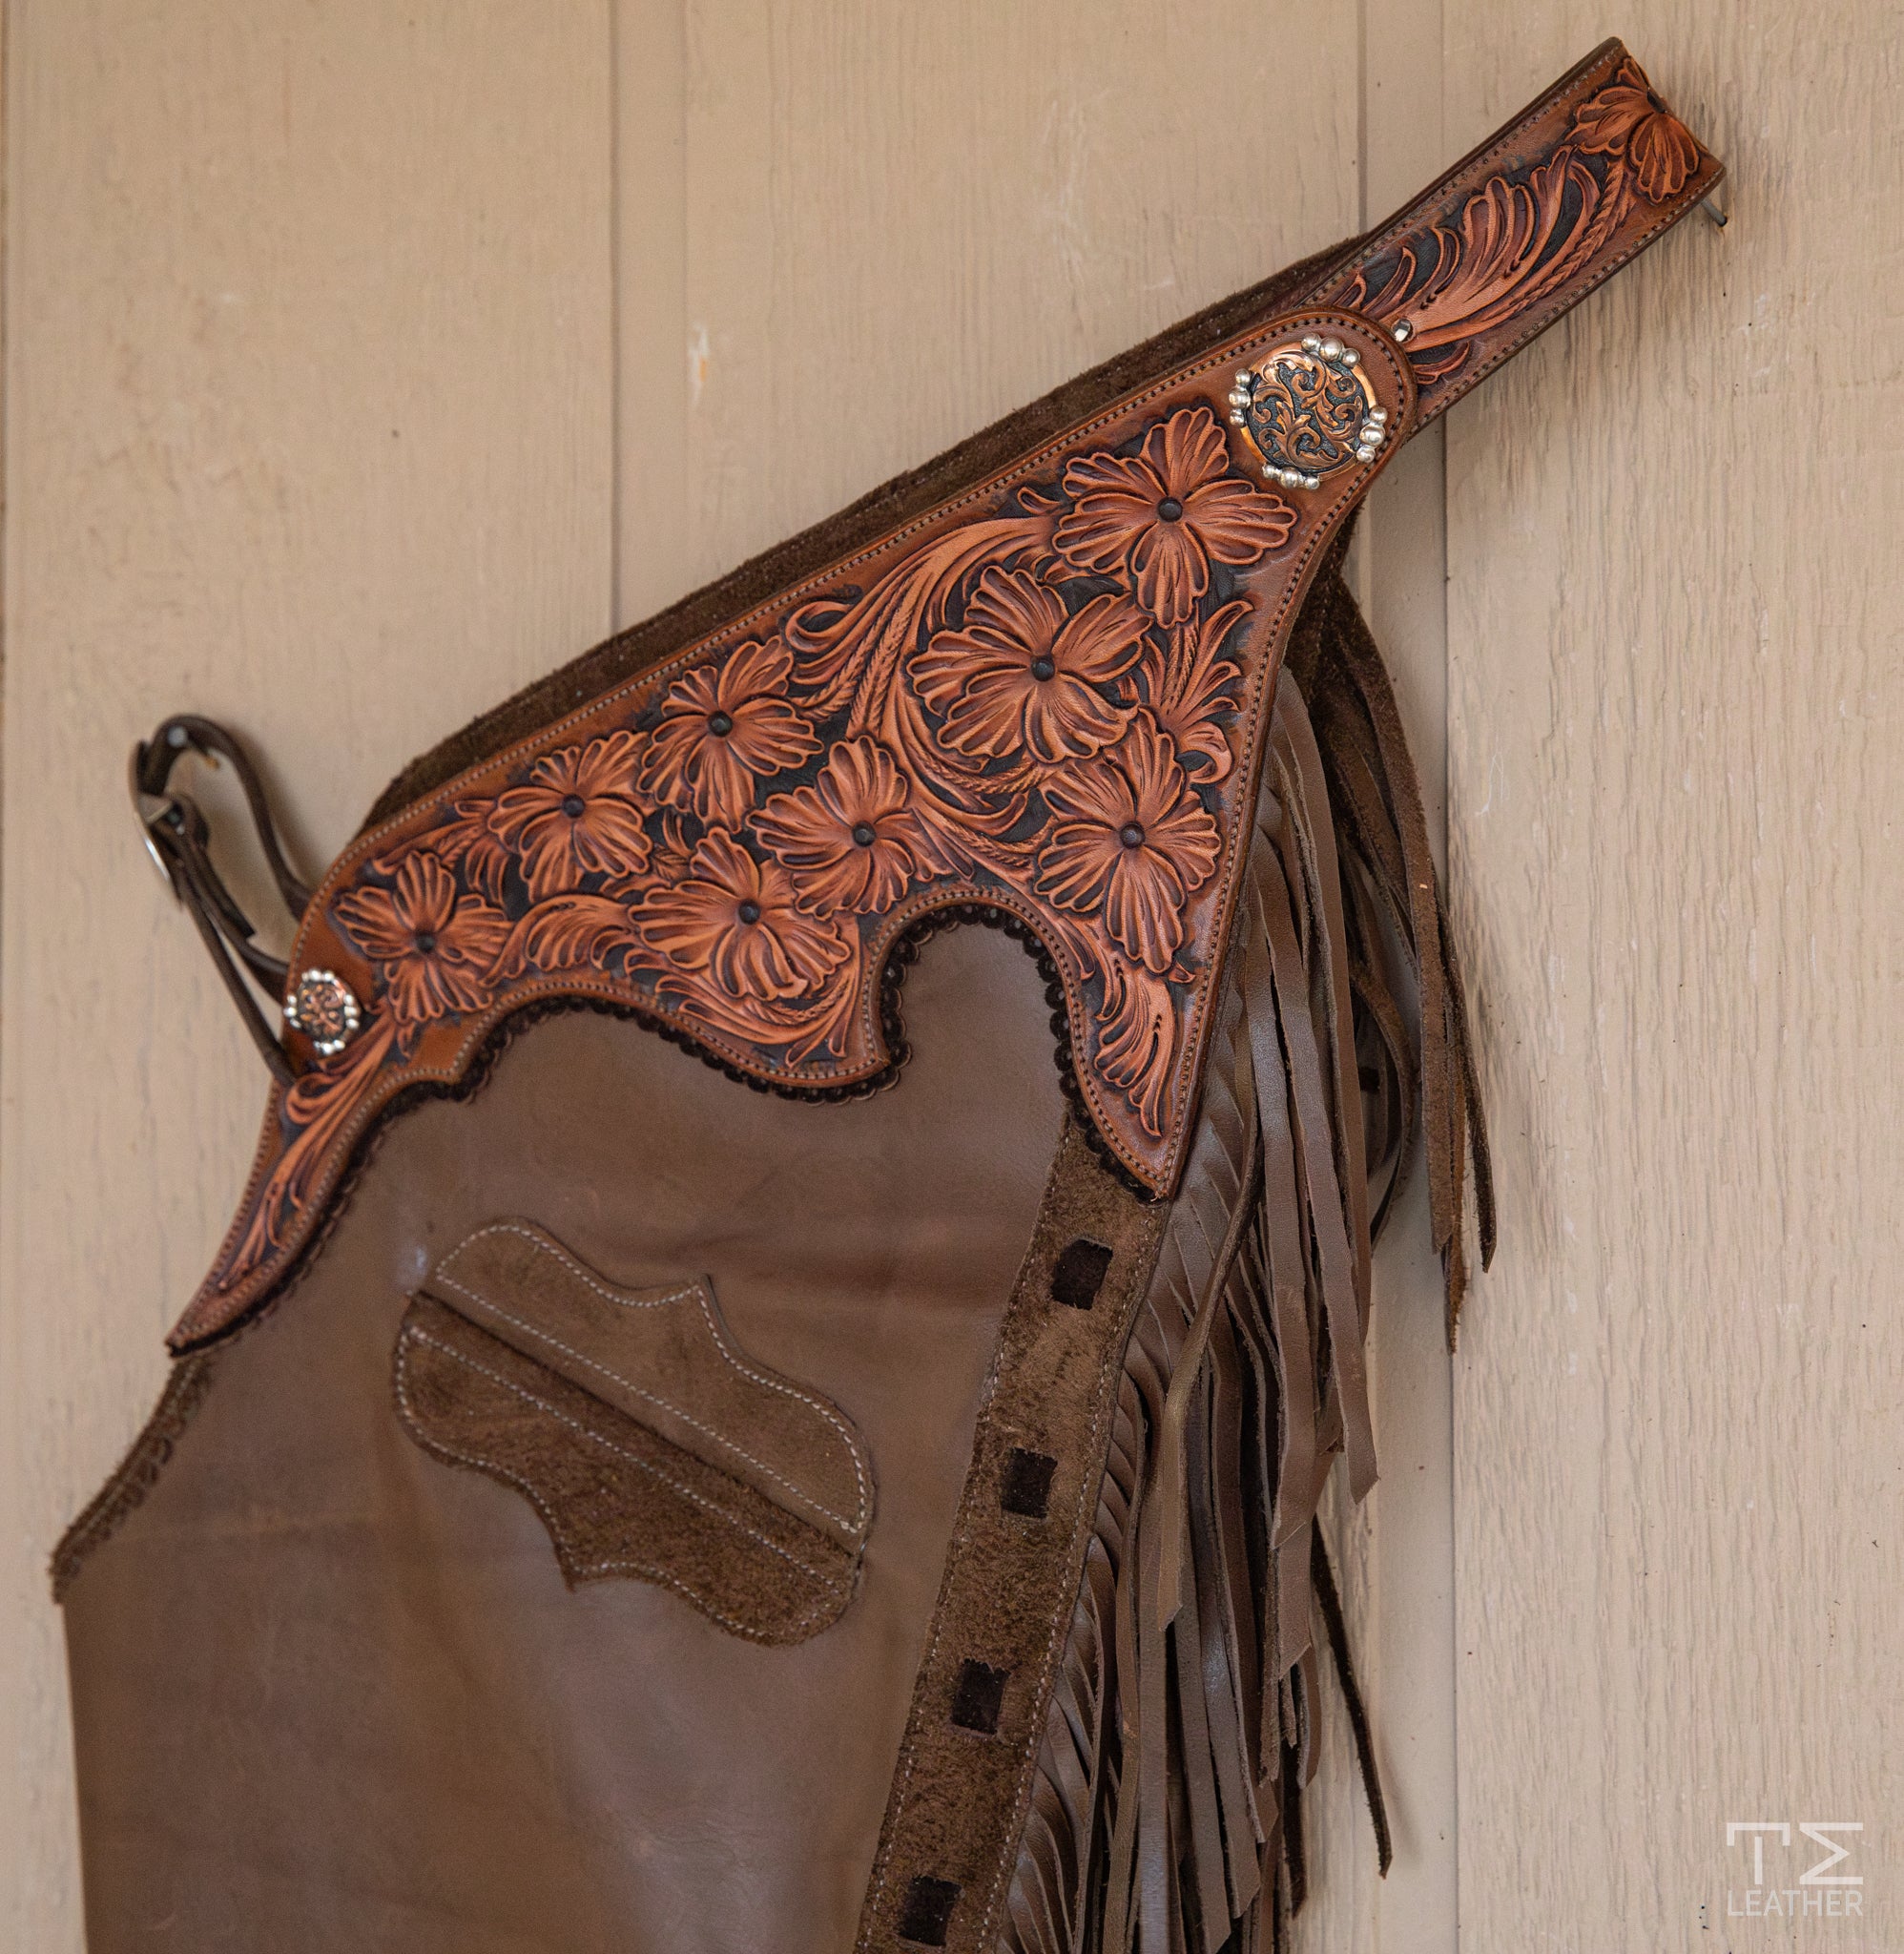 Taupe Smooth-out Chaps w/ Black, Lt. Brown & Walnut Floral Yokes & Pocket